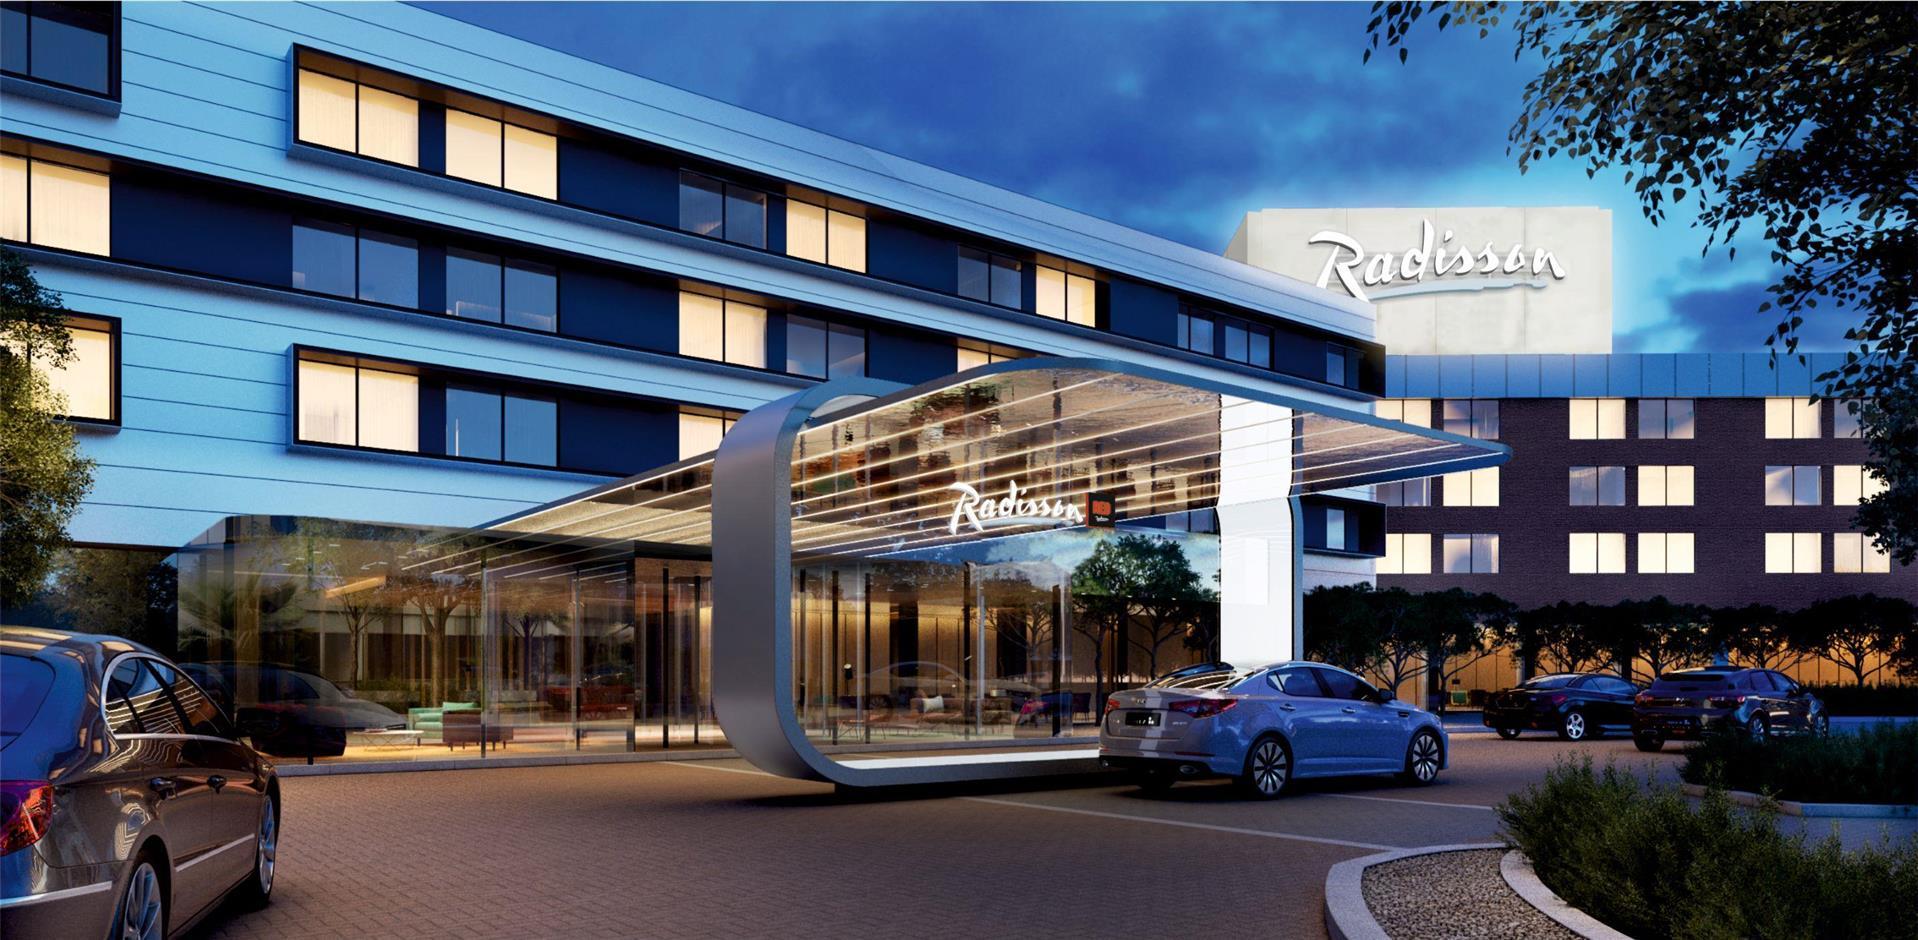 Radisson Hotel and Conference Centre London Heathrow in London, GB1